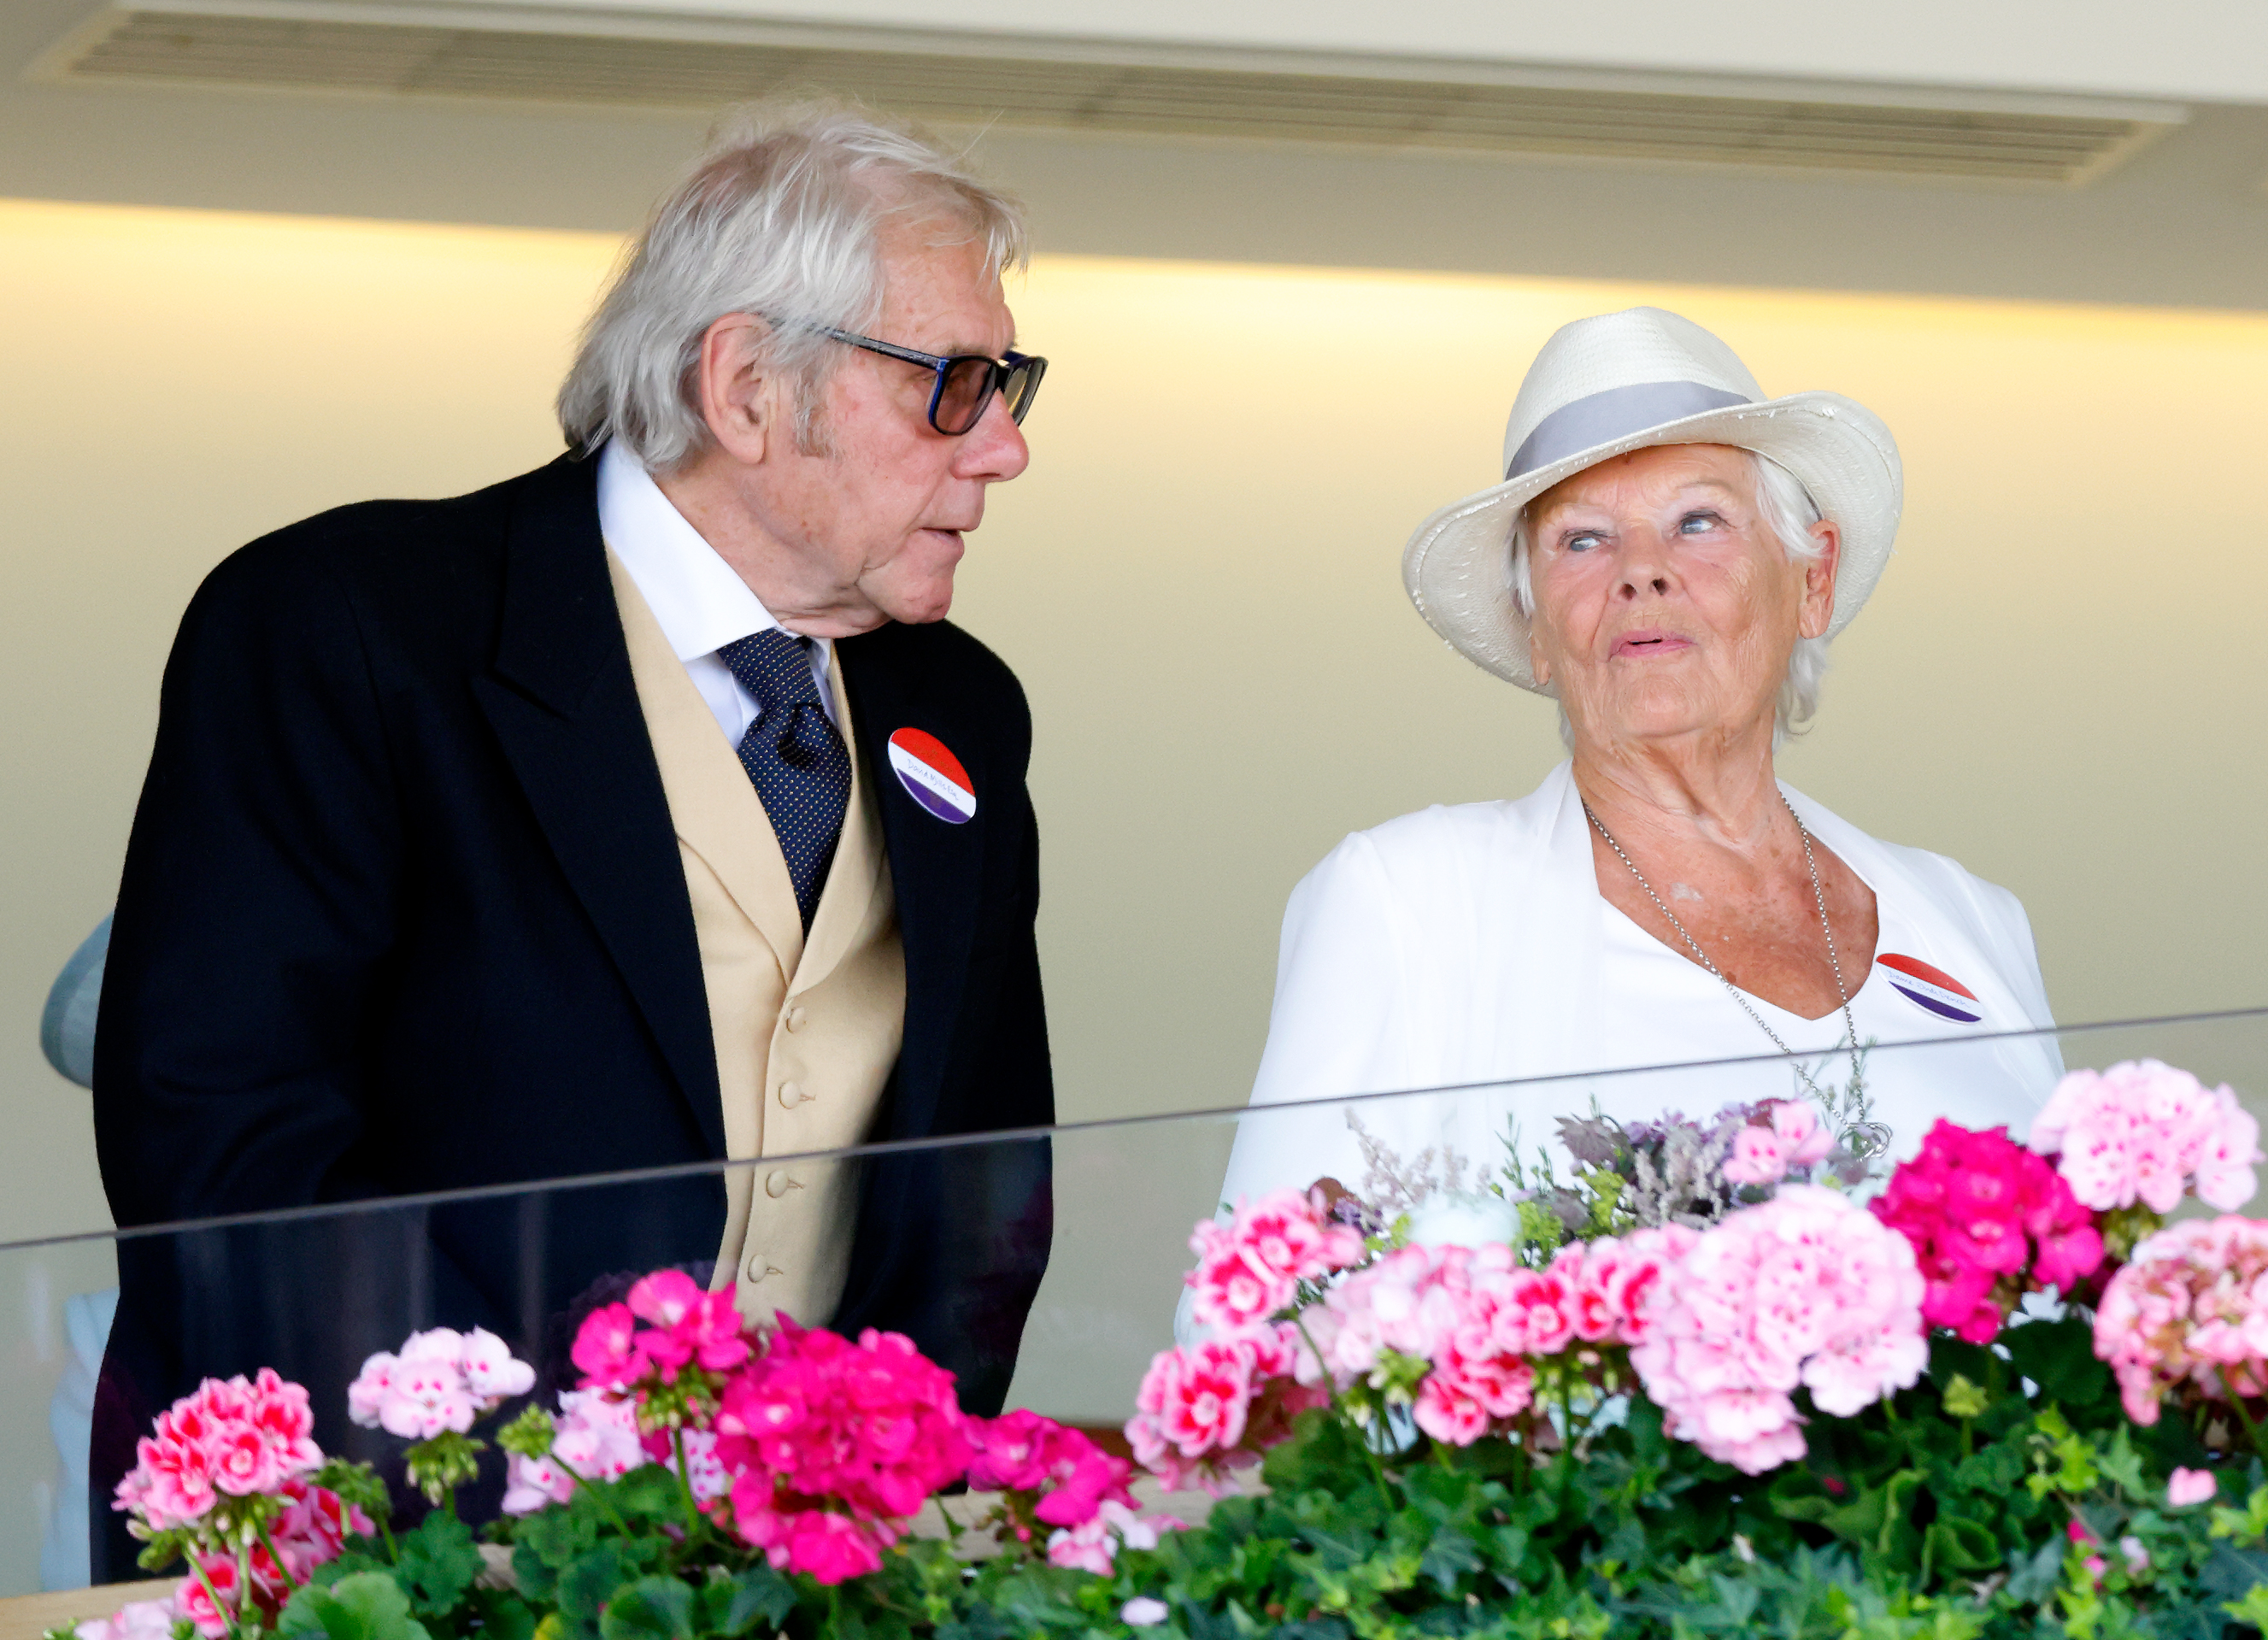 David Mills and Dame Judi Dench at the Royal Ascot in Ascot, 2023 | Source: Getty Images